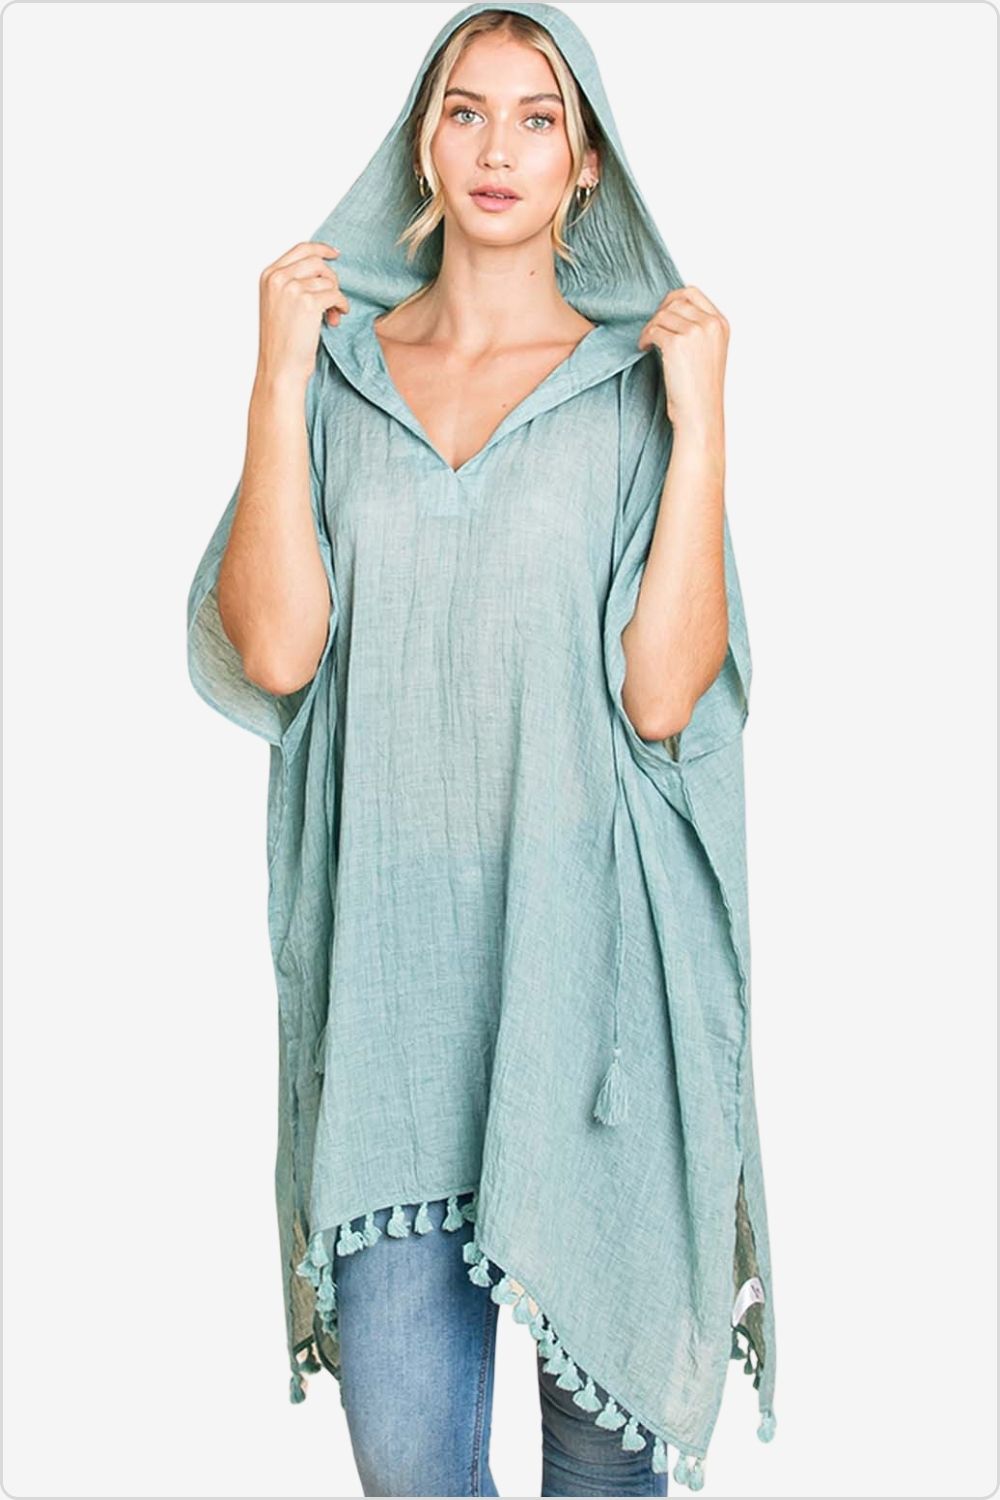 Fashion-forward hooded beach cover-up with tassel hem, perfect for stylish sun protection, Color Mint